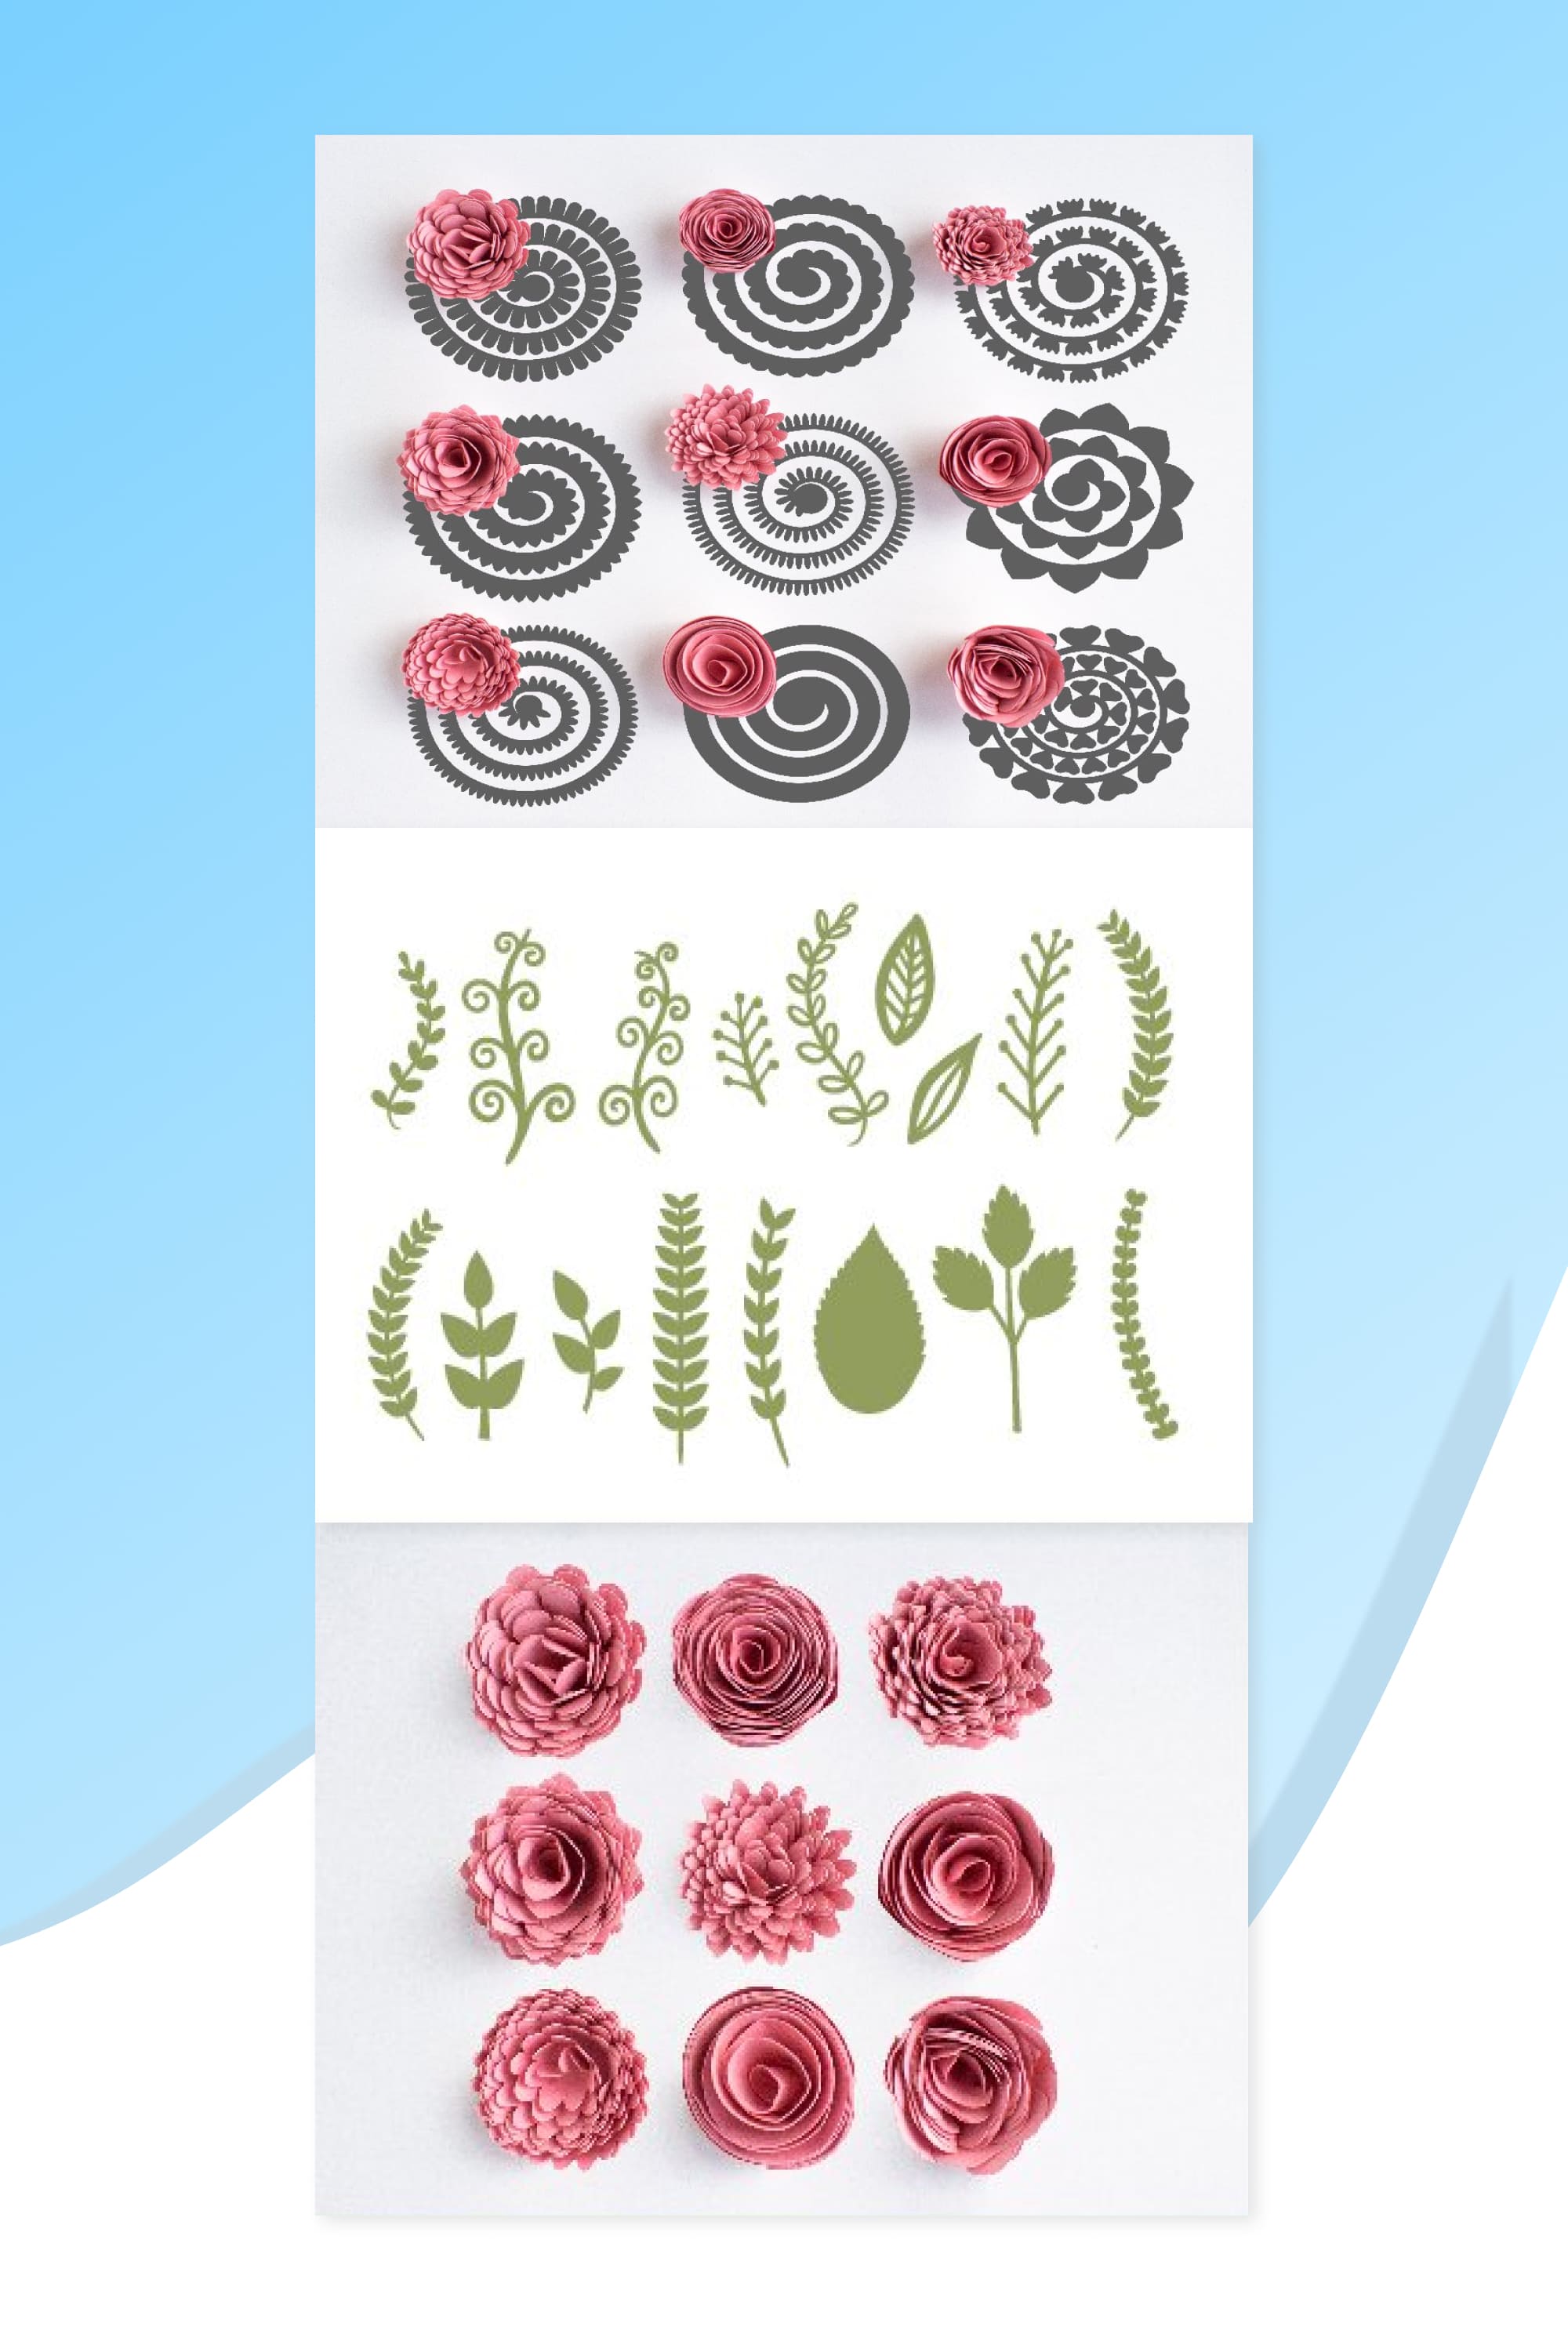 rolled flowers svg 9 rolled paper flower templates pinterest3